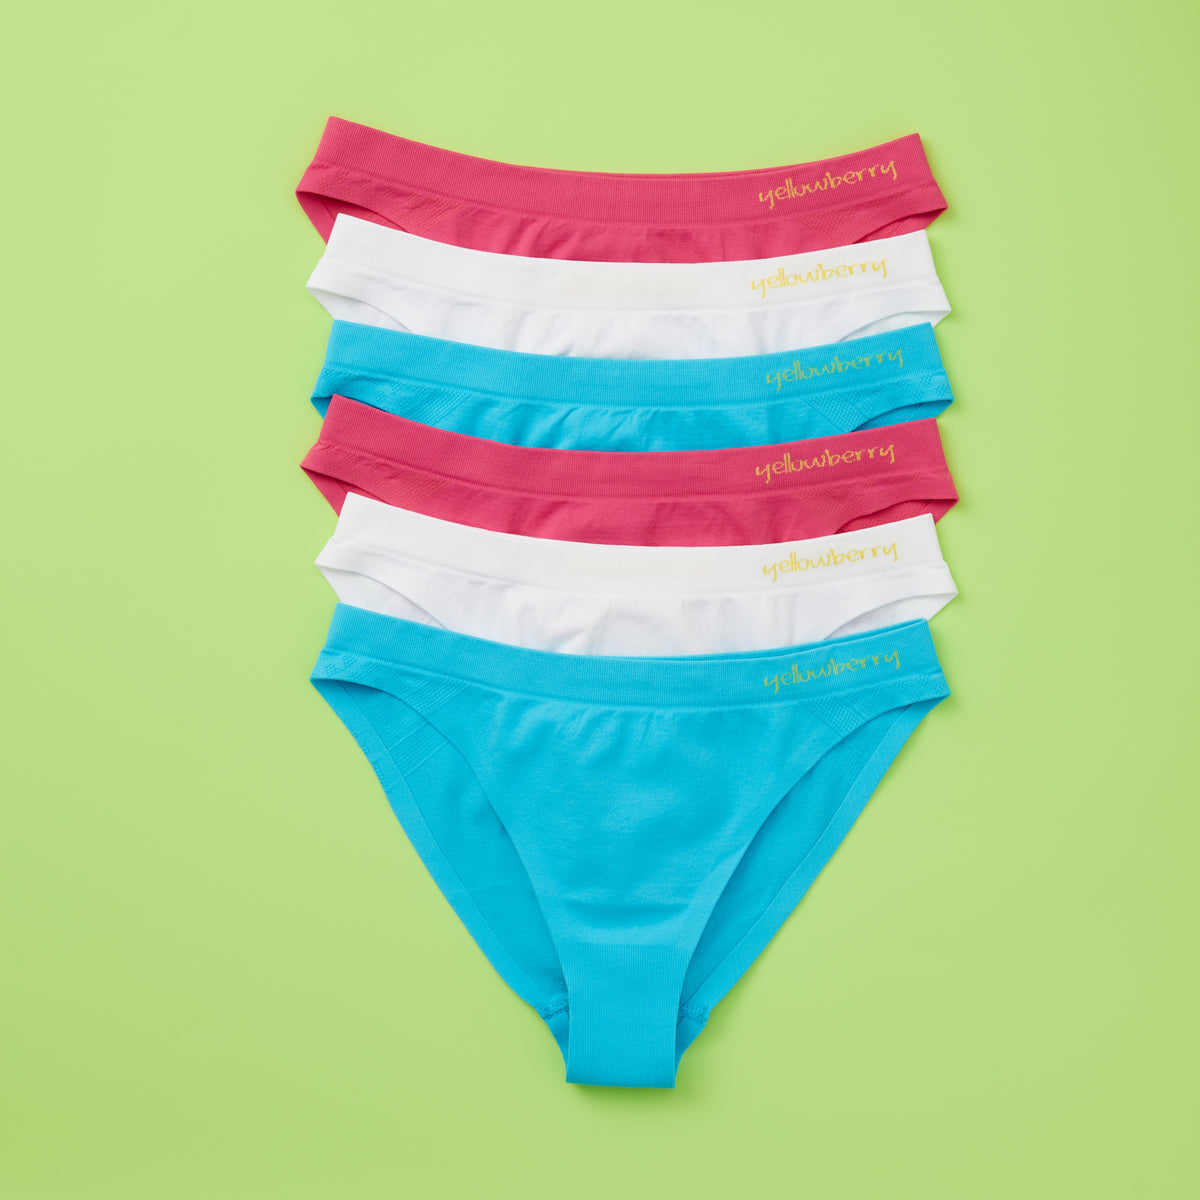 Yellowberry red white and blue underwear for tweens bundle